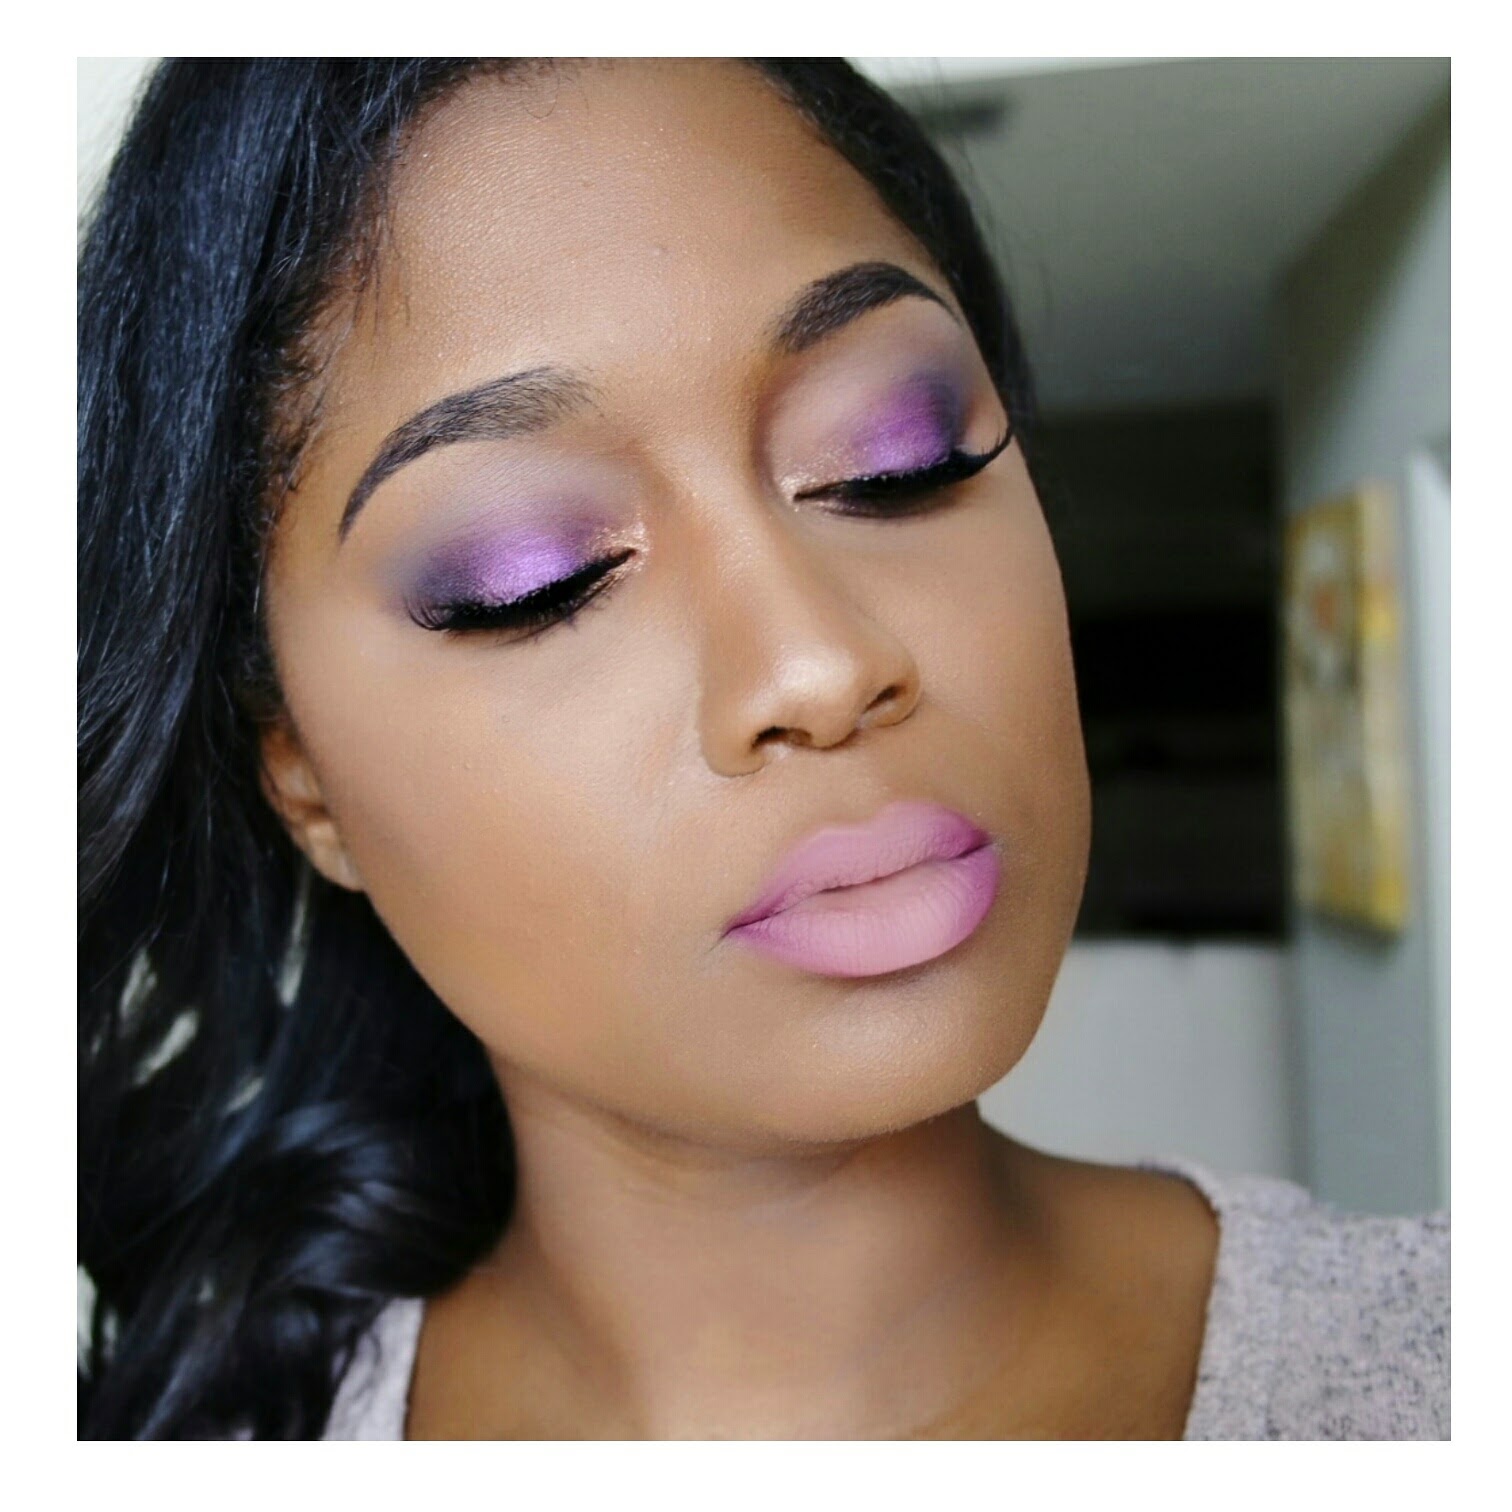 Beauty Tips 101: 6 Tips for the Perfect Bright Eye Shadow - Treceefabulous